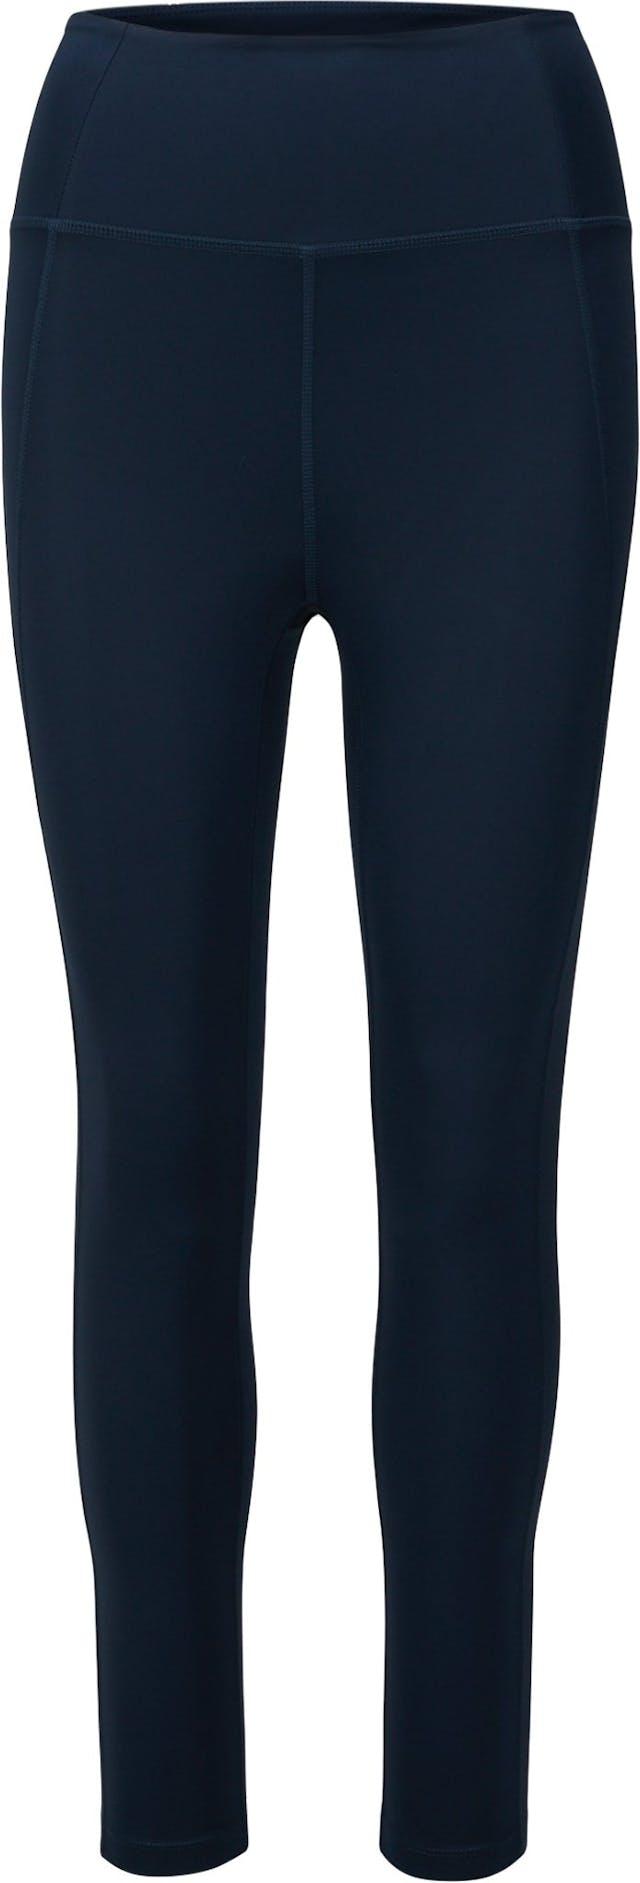 Product image for Compressive High-Rise 23.75 In Legging - Women's